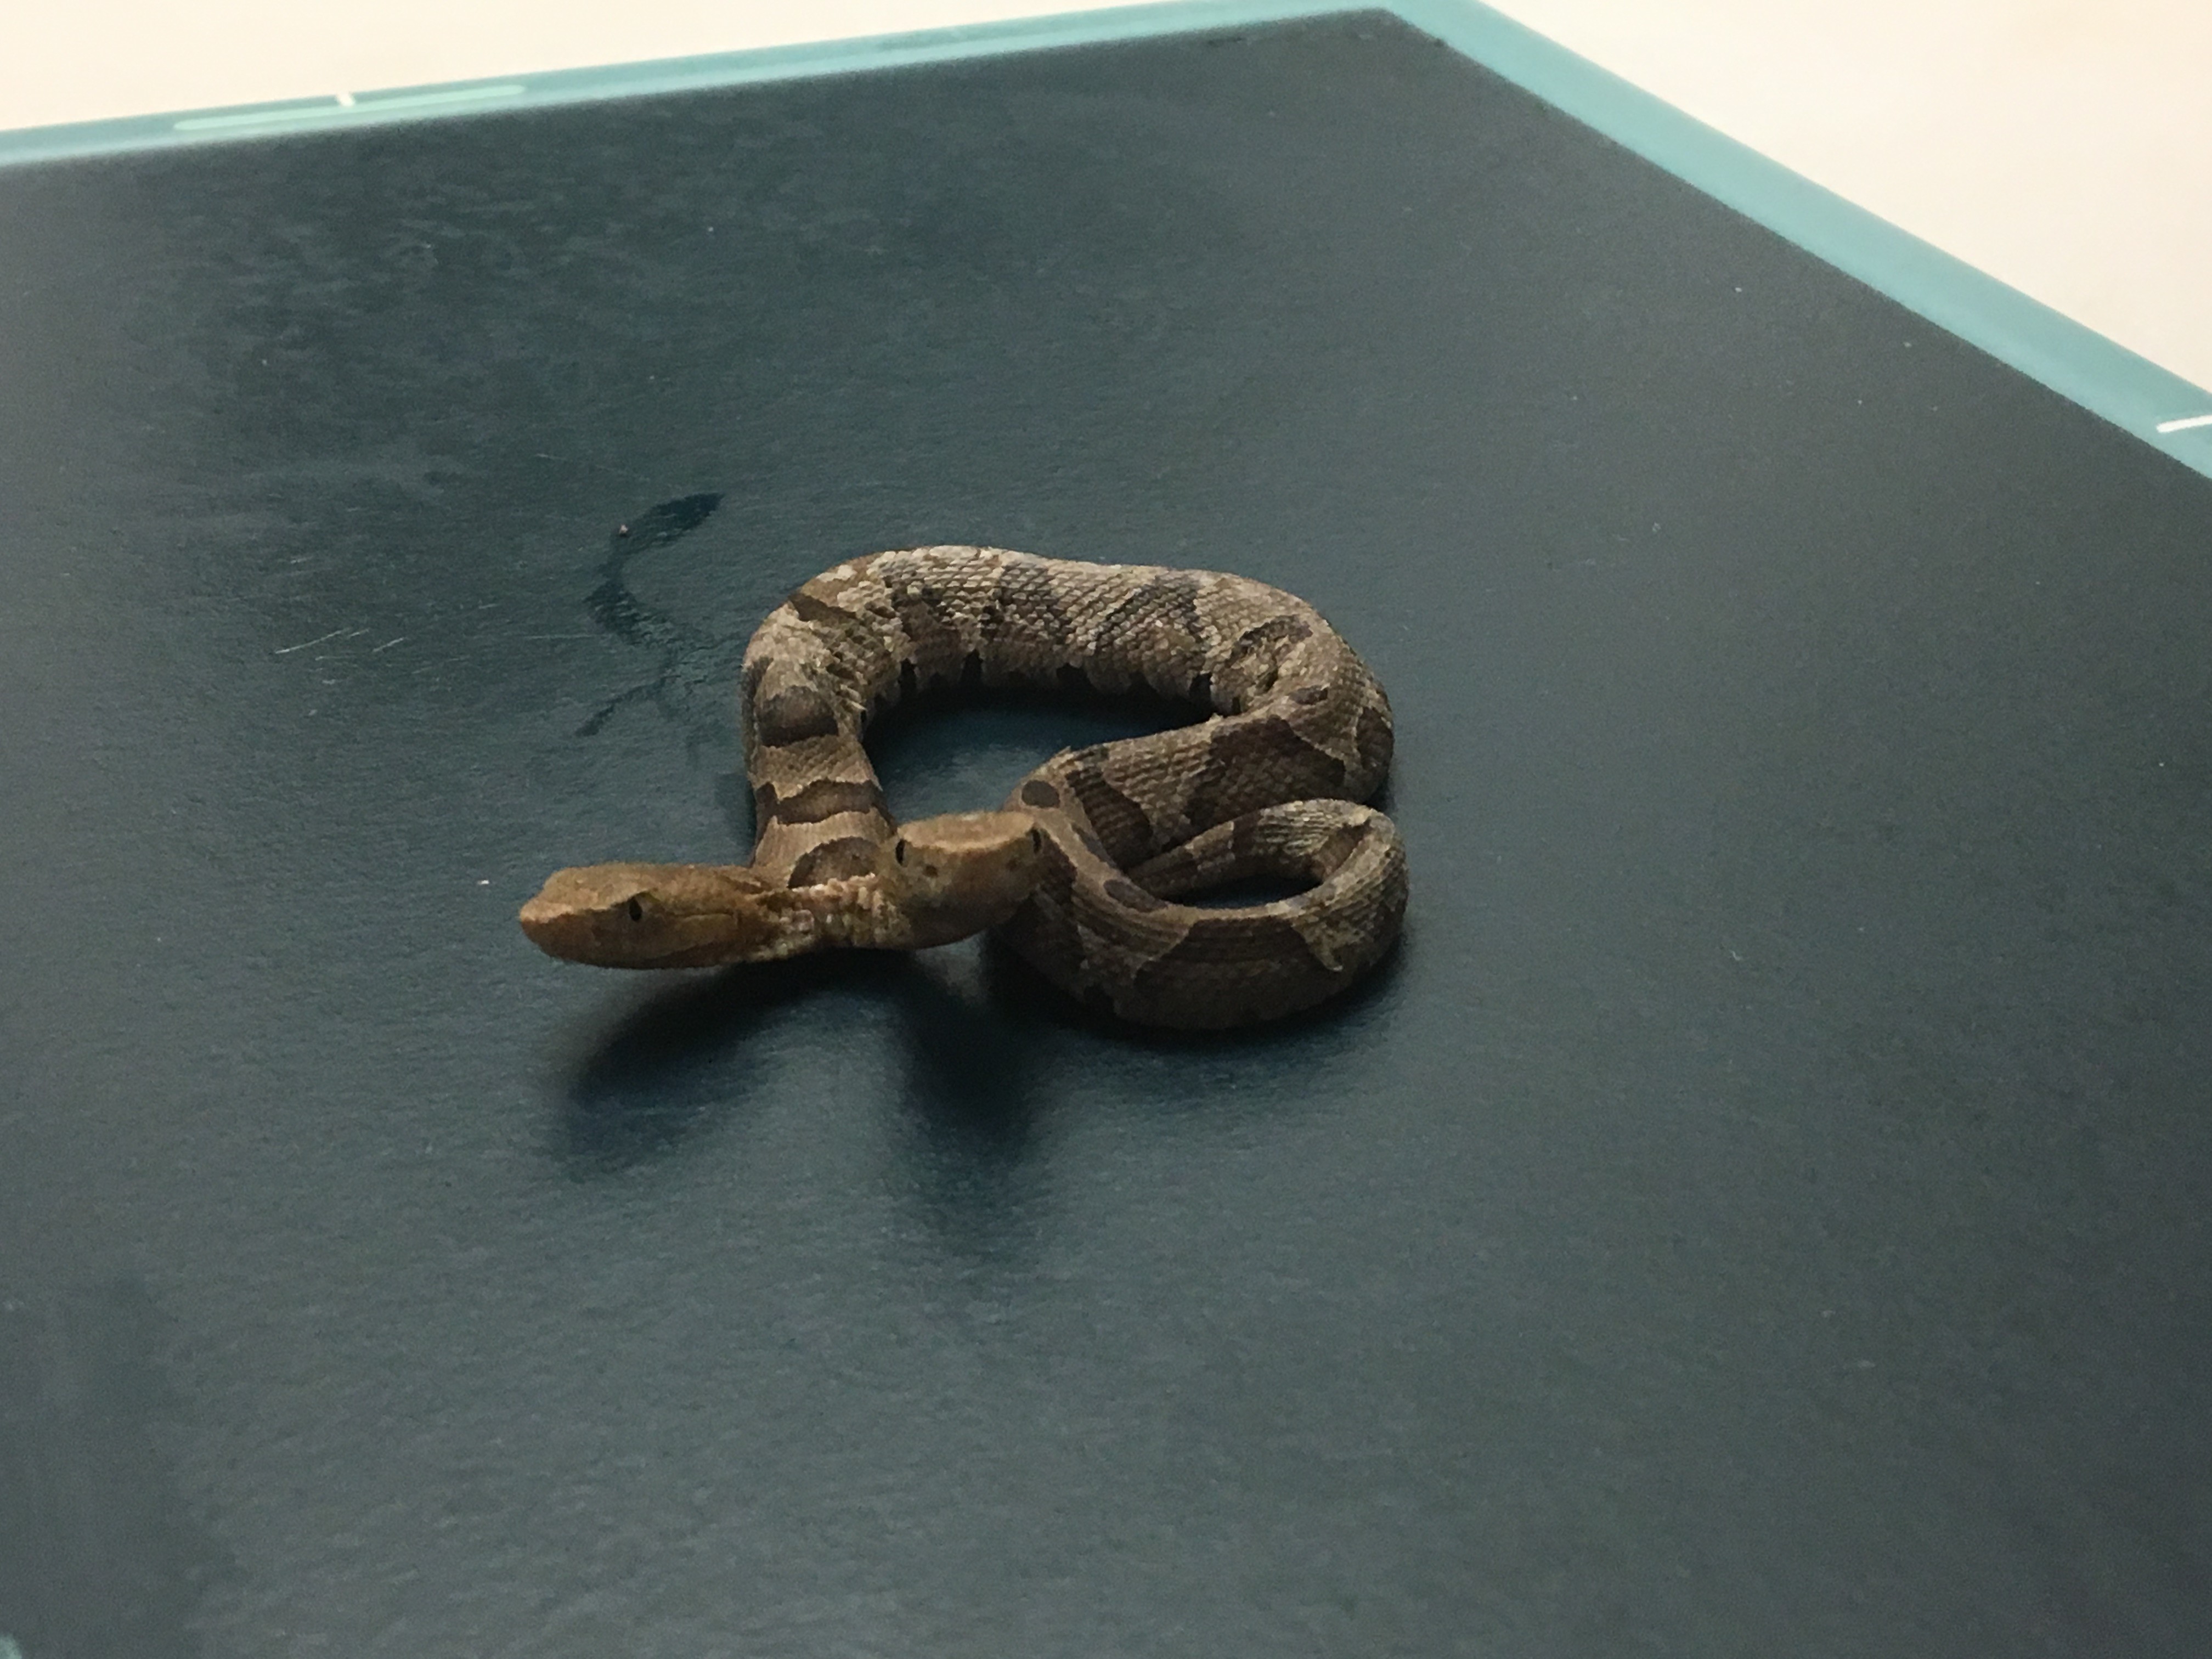 The snake on a table